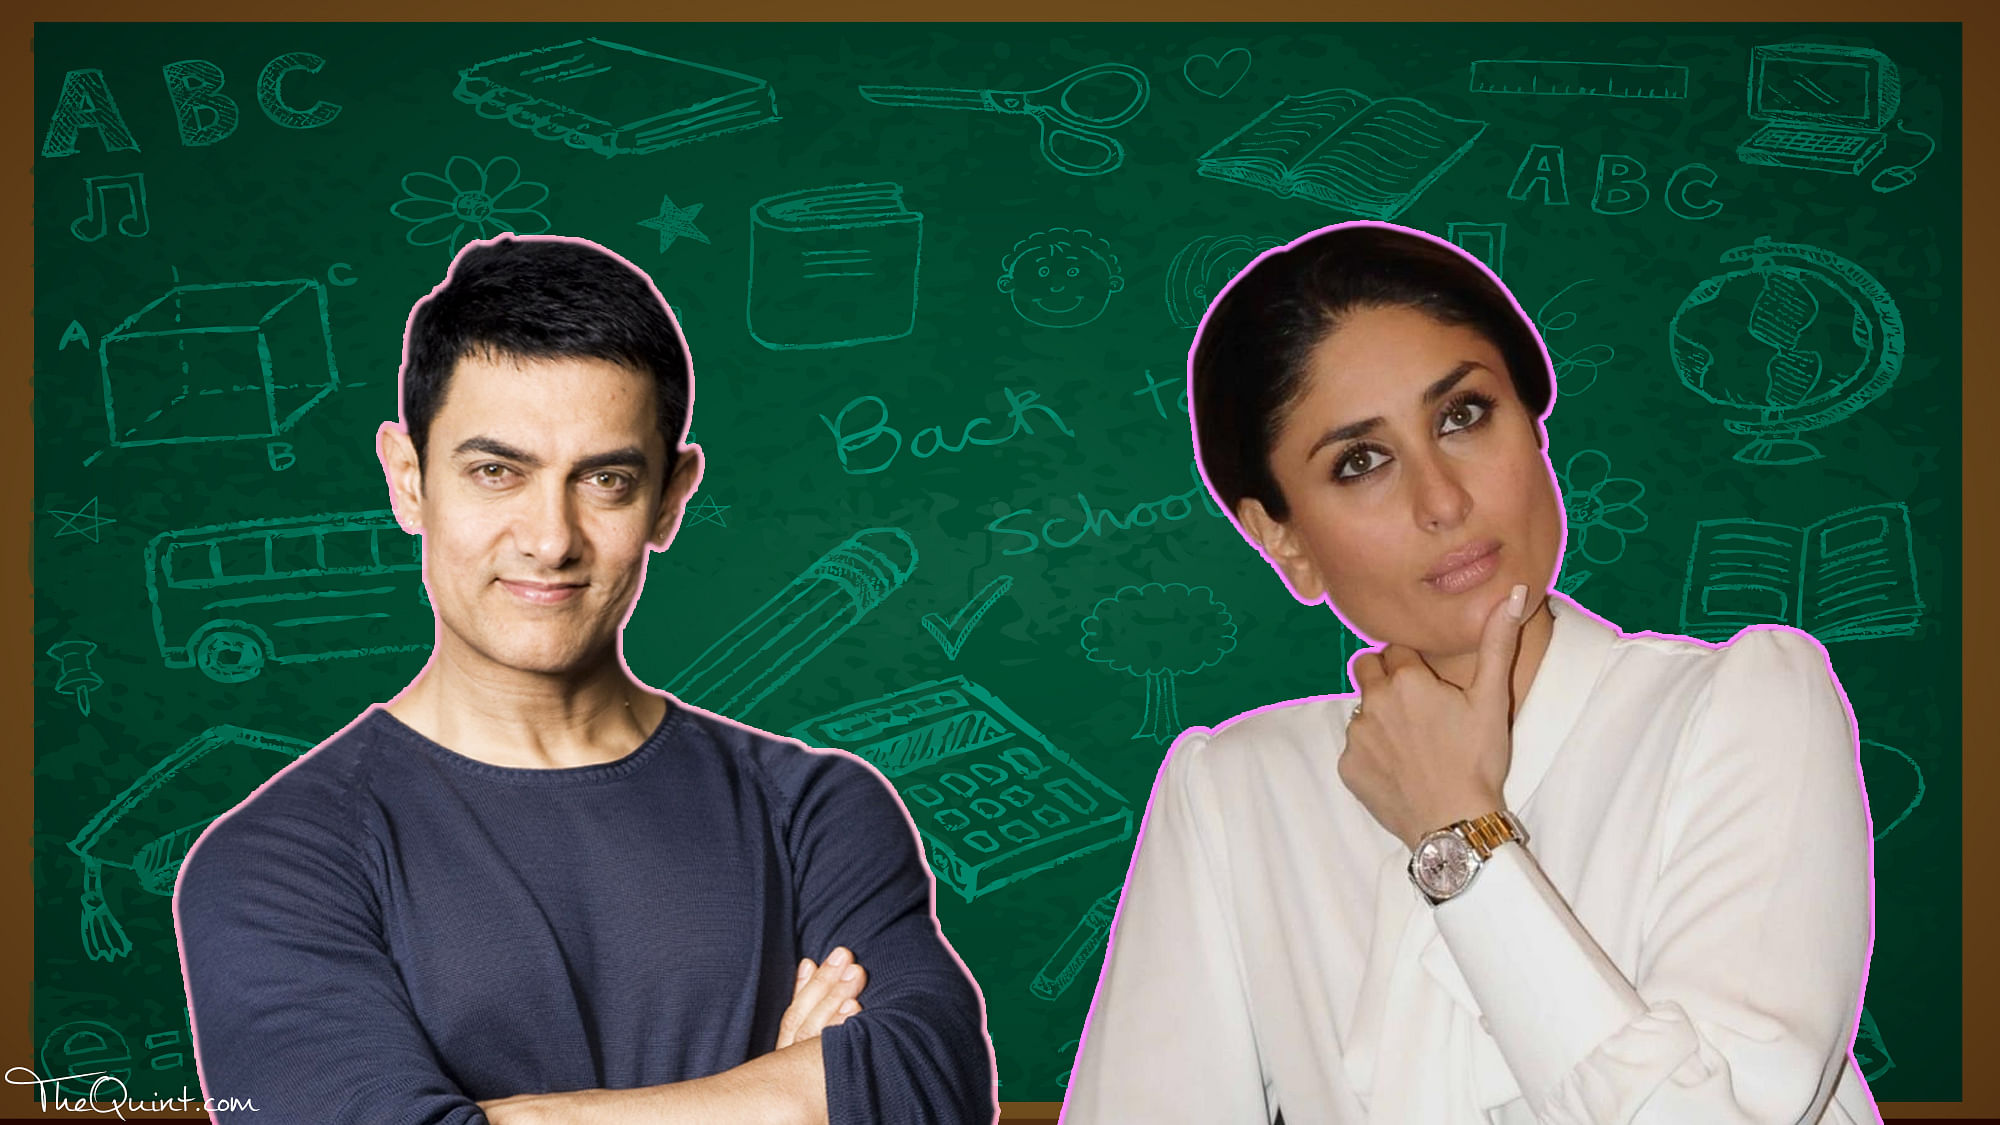 What if board results day was just like a big Friday release day? How would our Bollywood actors score? 